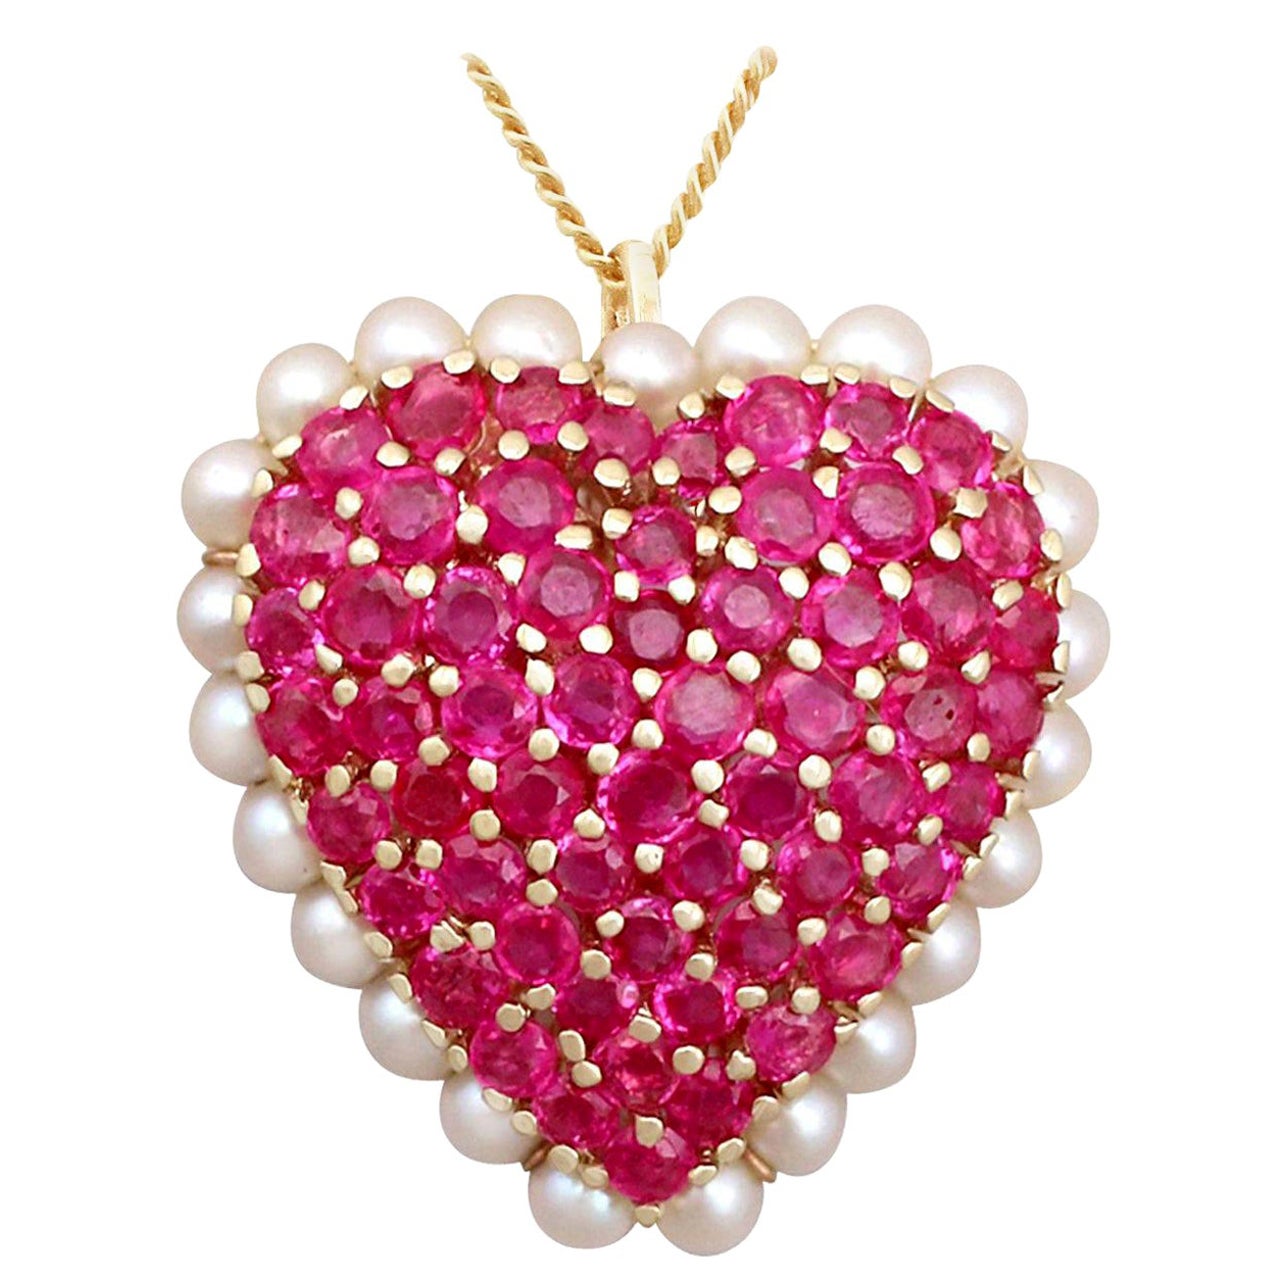 3.36 Carat Ruby and Seed Pearl Yellow Gold Heart Pendant Brooch